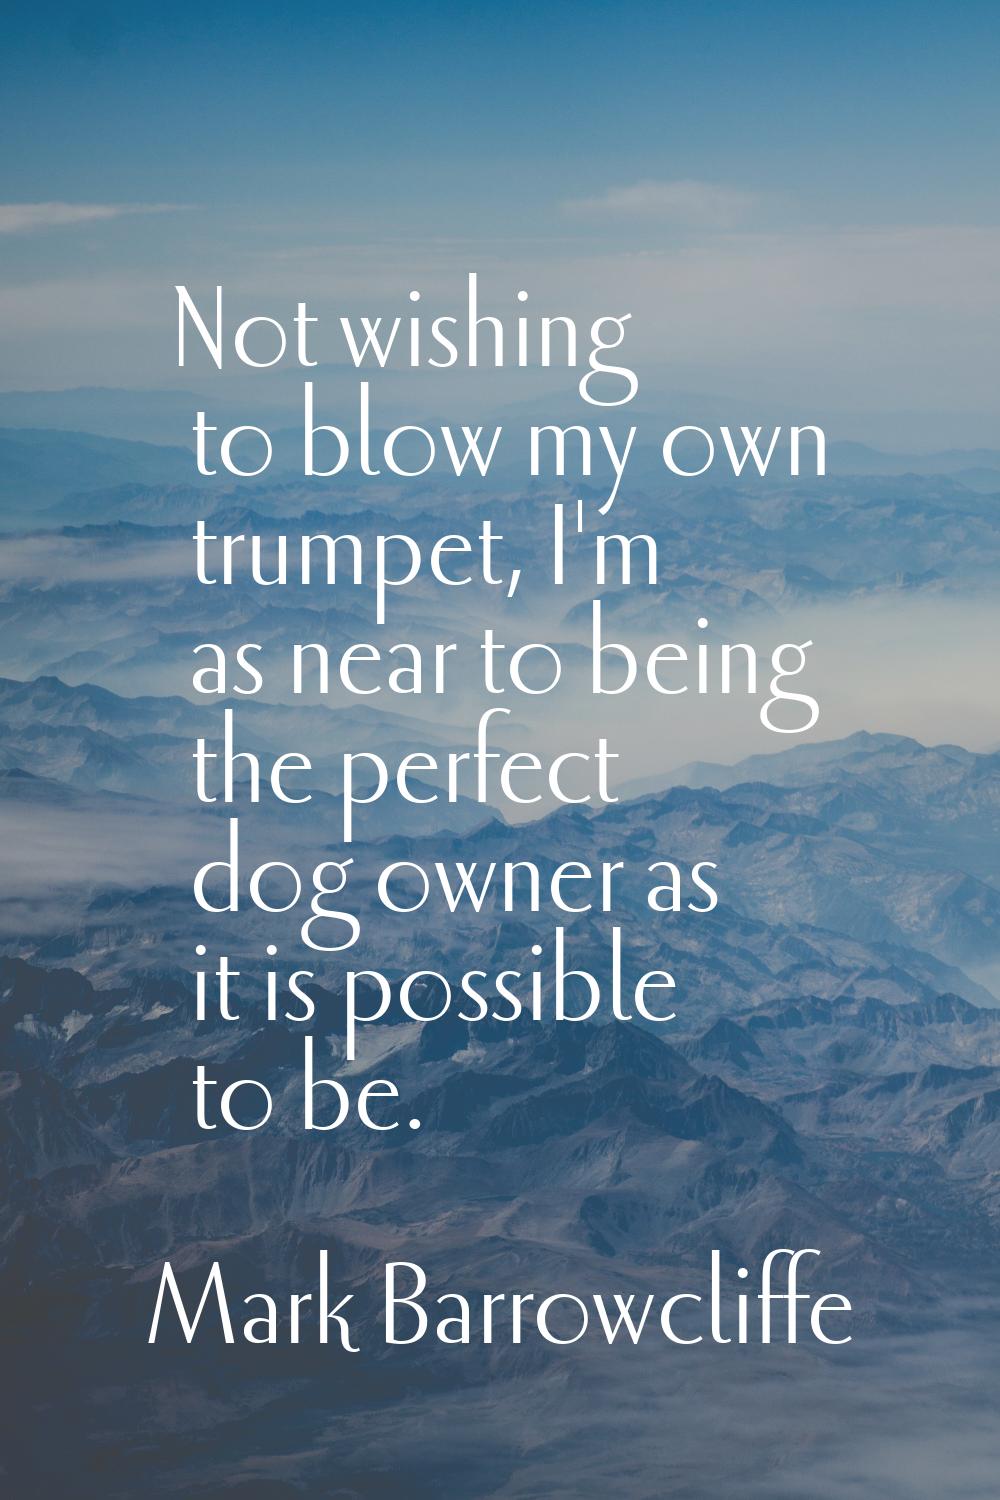 Not wishing to blow my own trumpet, I'm as near to being the perfect dog owner as it is possible to